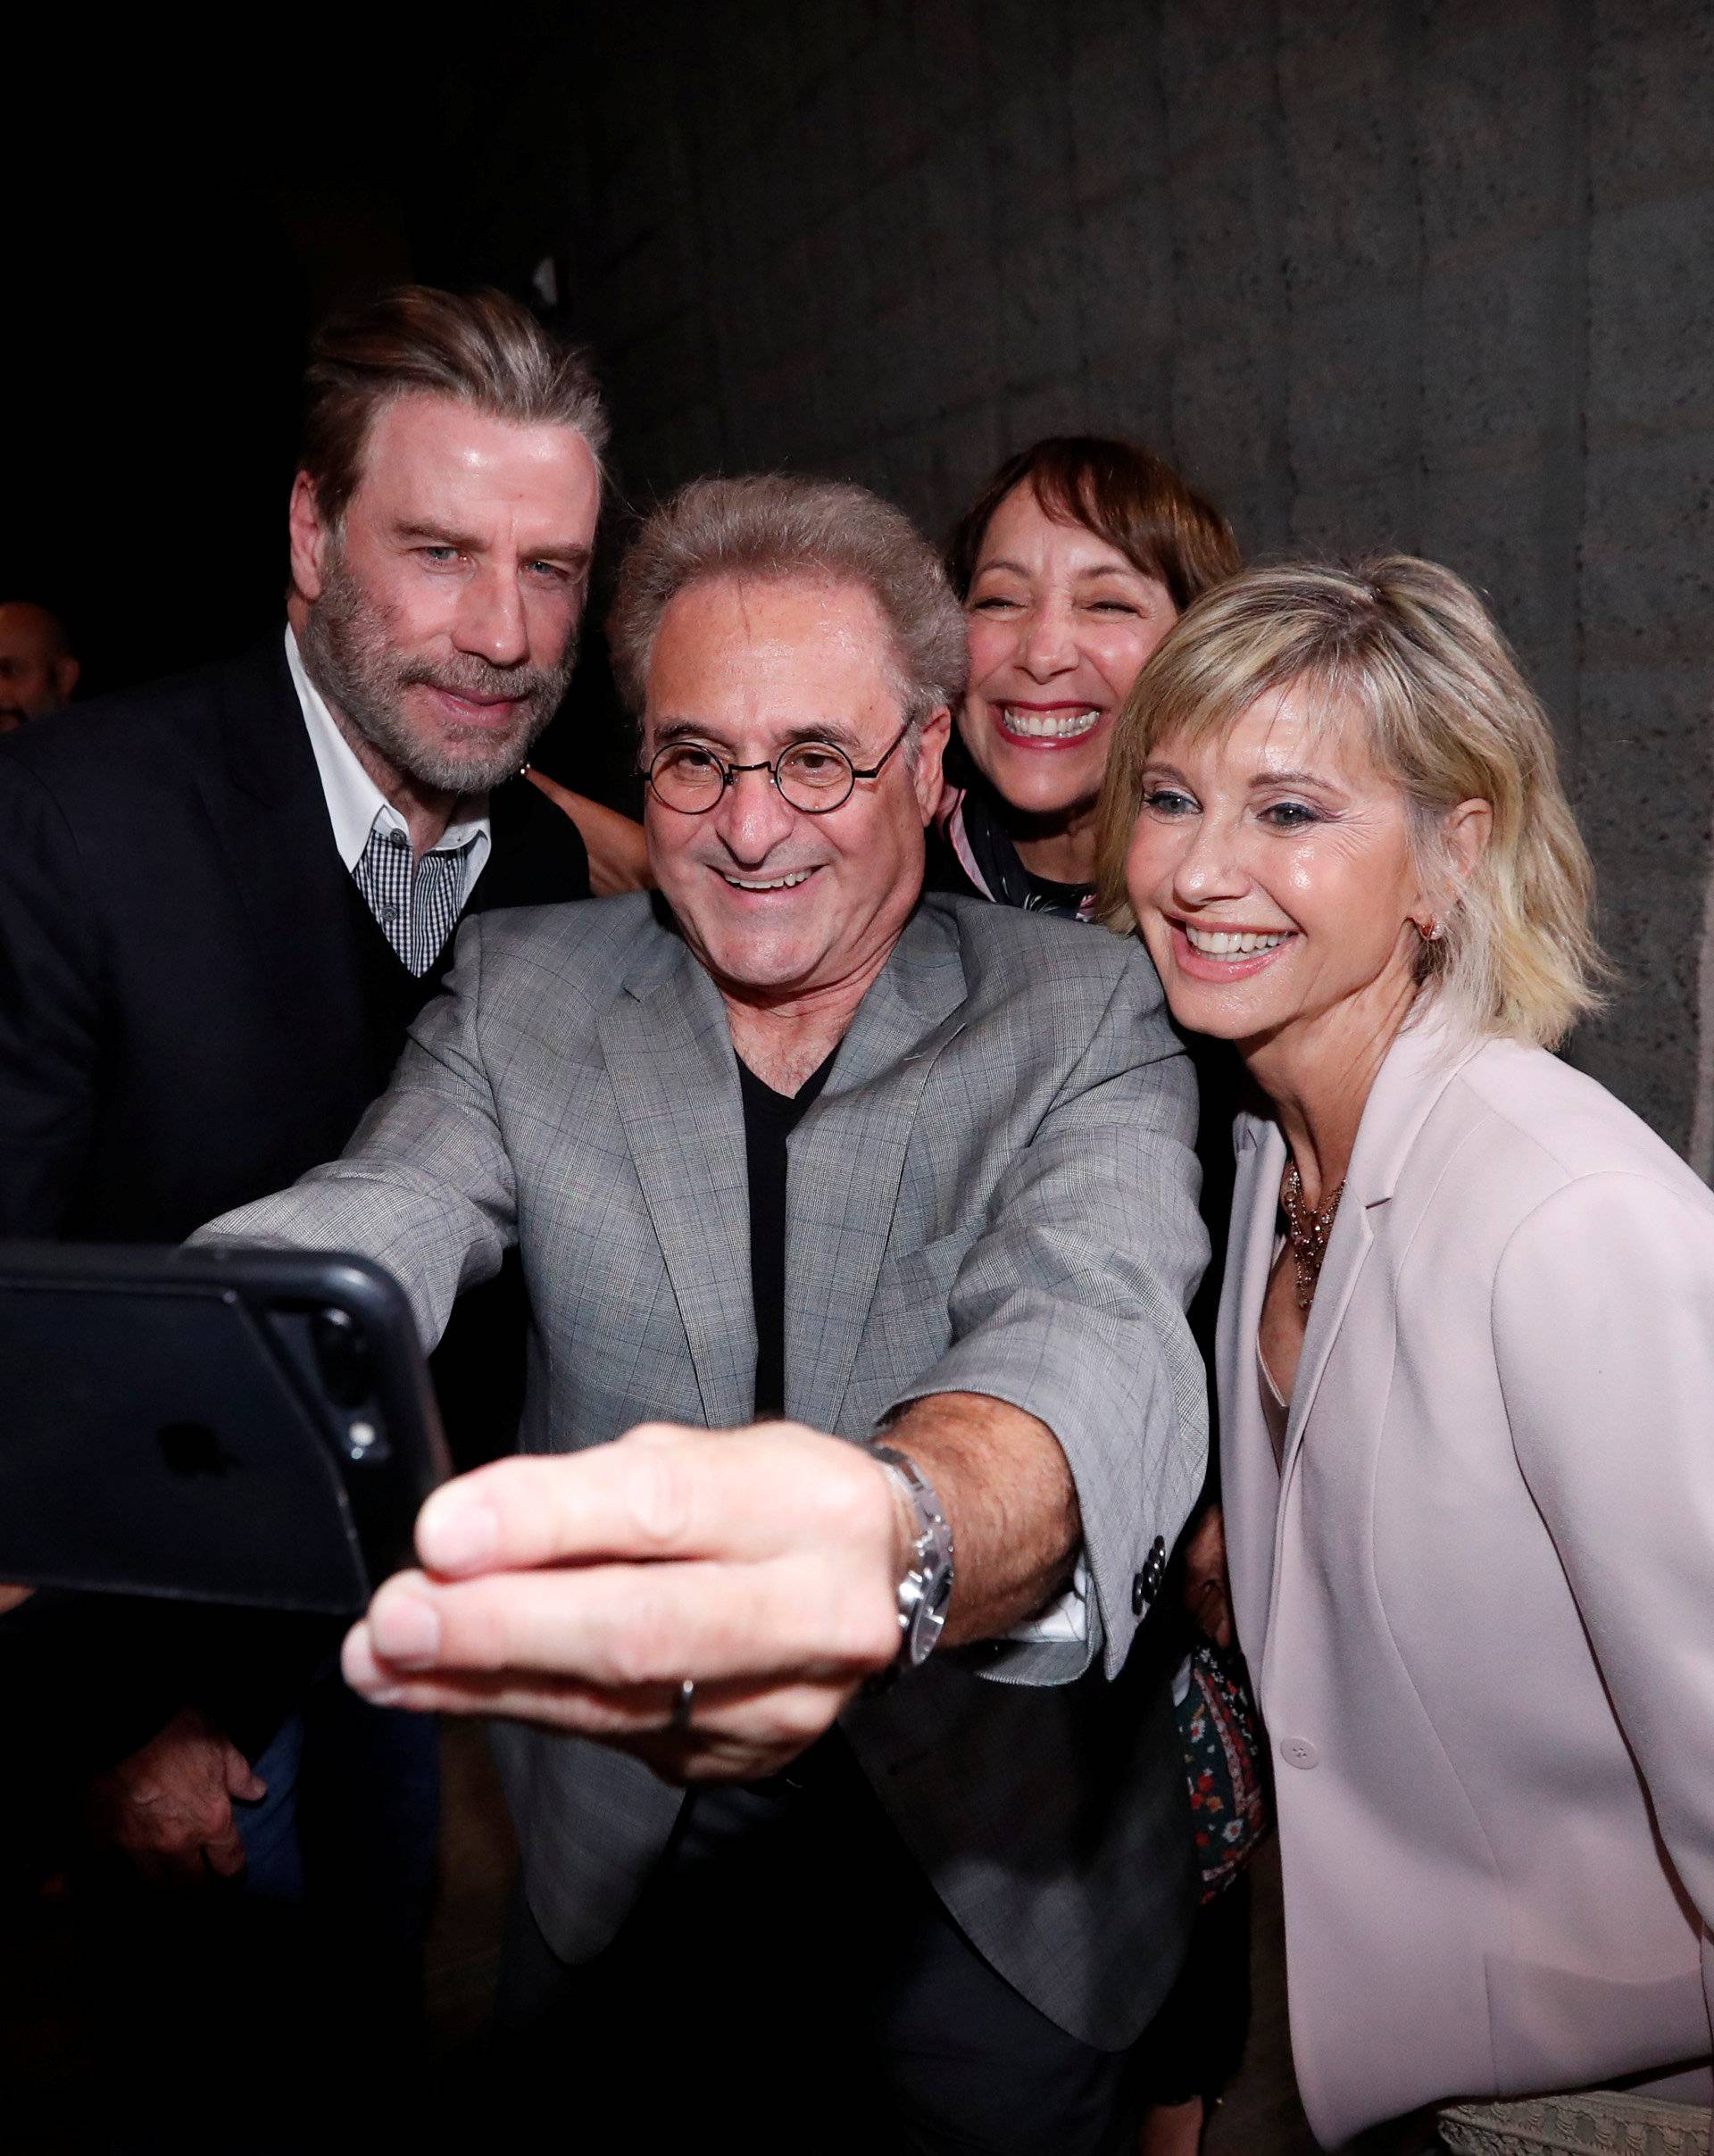 Cast members Travolta, Pearl, Conn and Newton-John pose for a selfie at a 40th anniversary screening of "Grease" at the Academy of Motion Picture Arts and Sciences in Beverly Hills